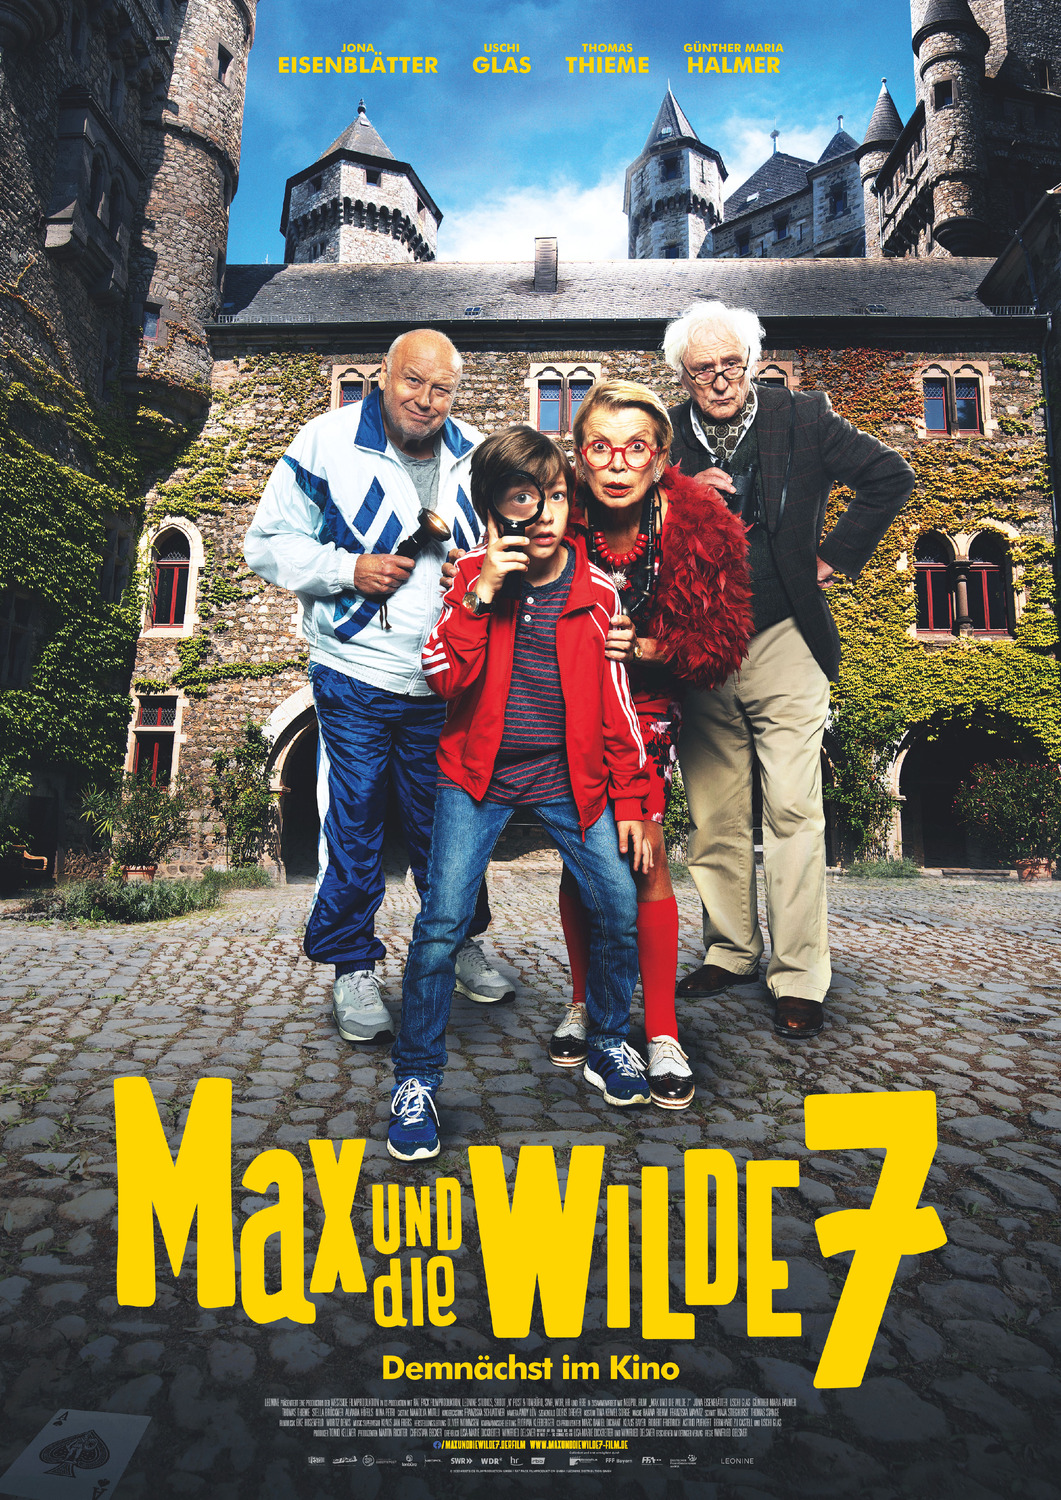 Extra Large Movie Poster Image for Max und die wilde 7 